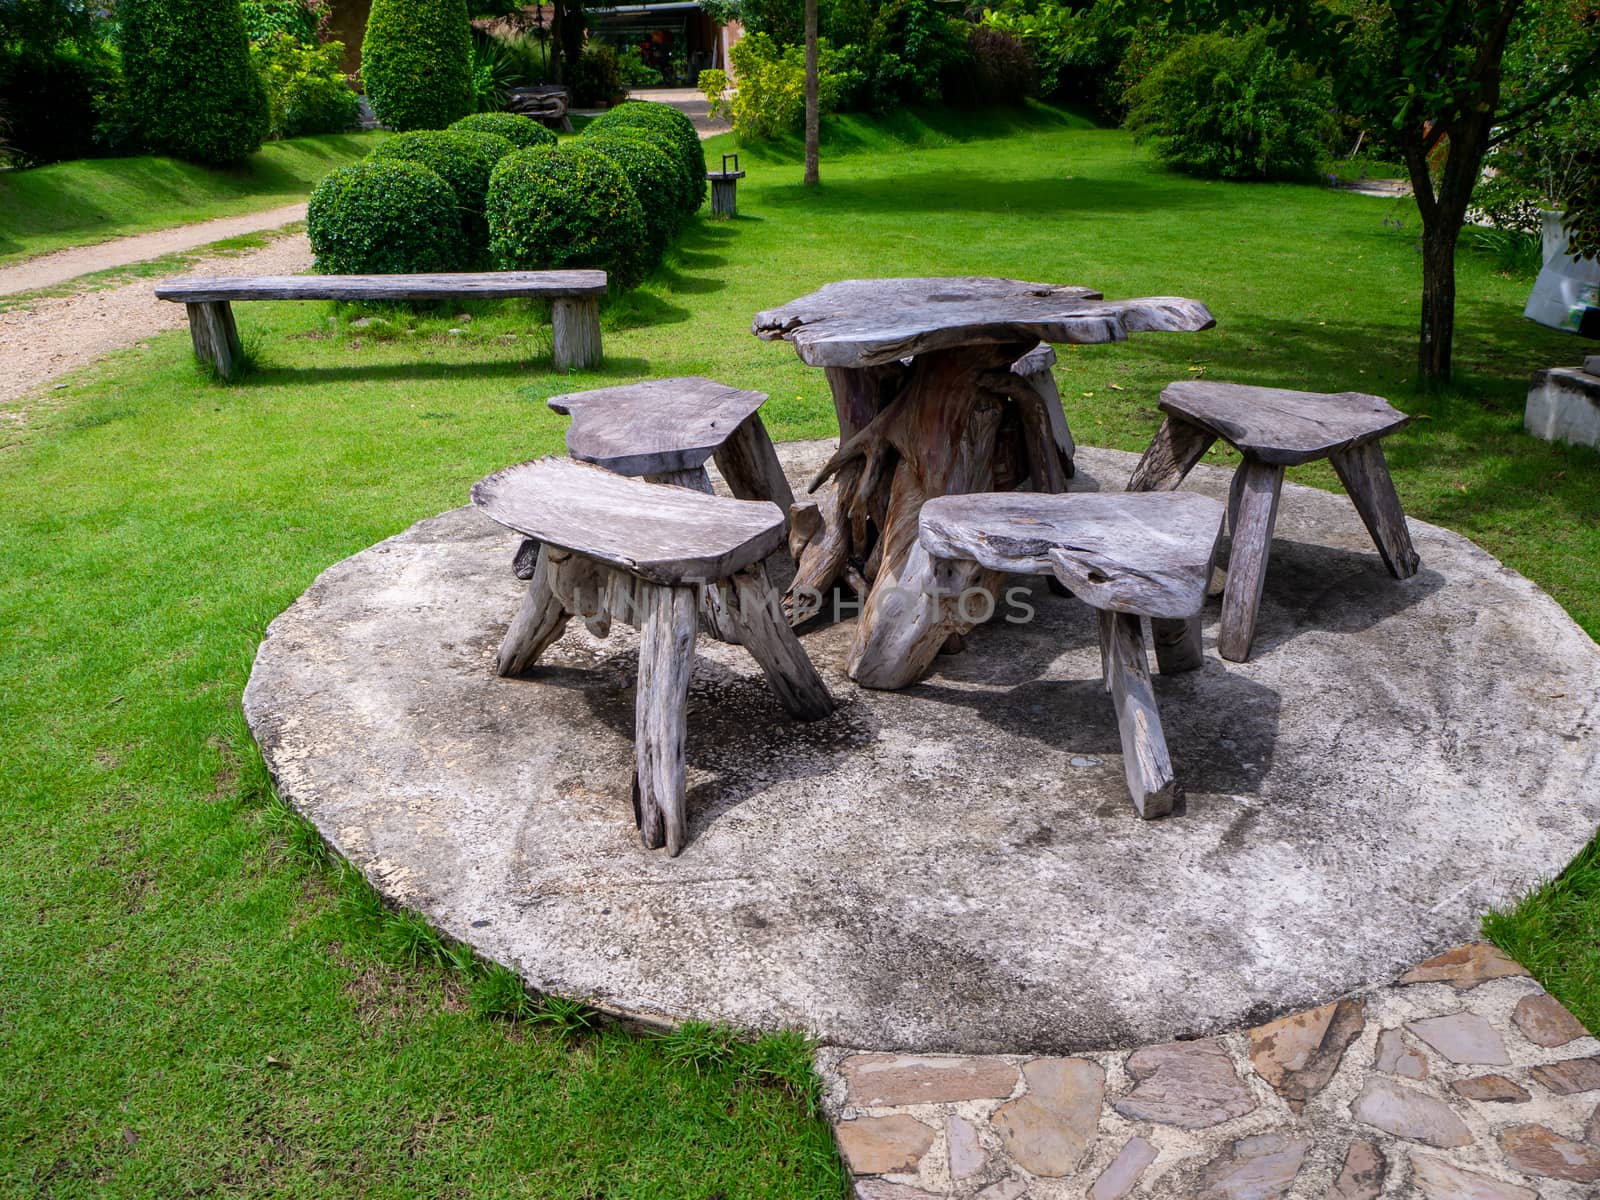 The Old wooden table set  in the green garden. by shutterbird